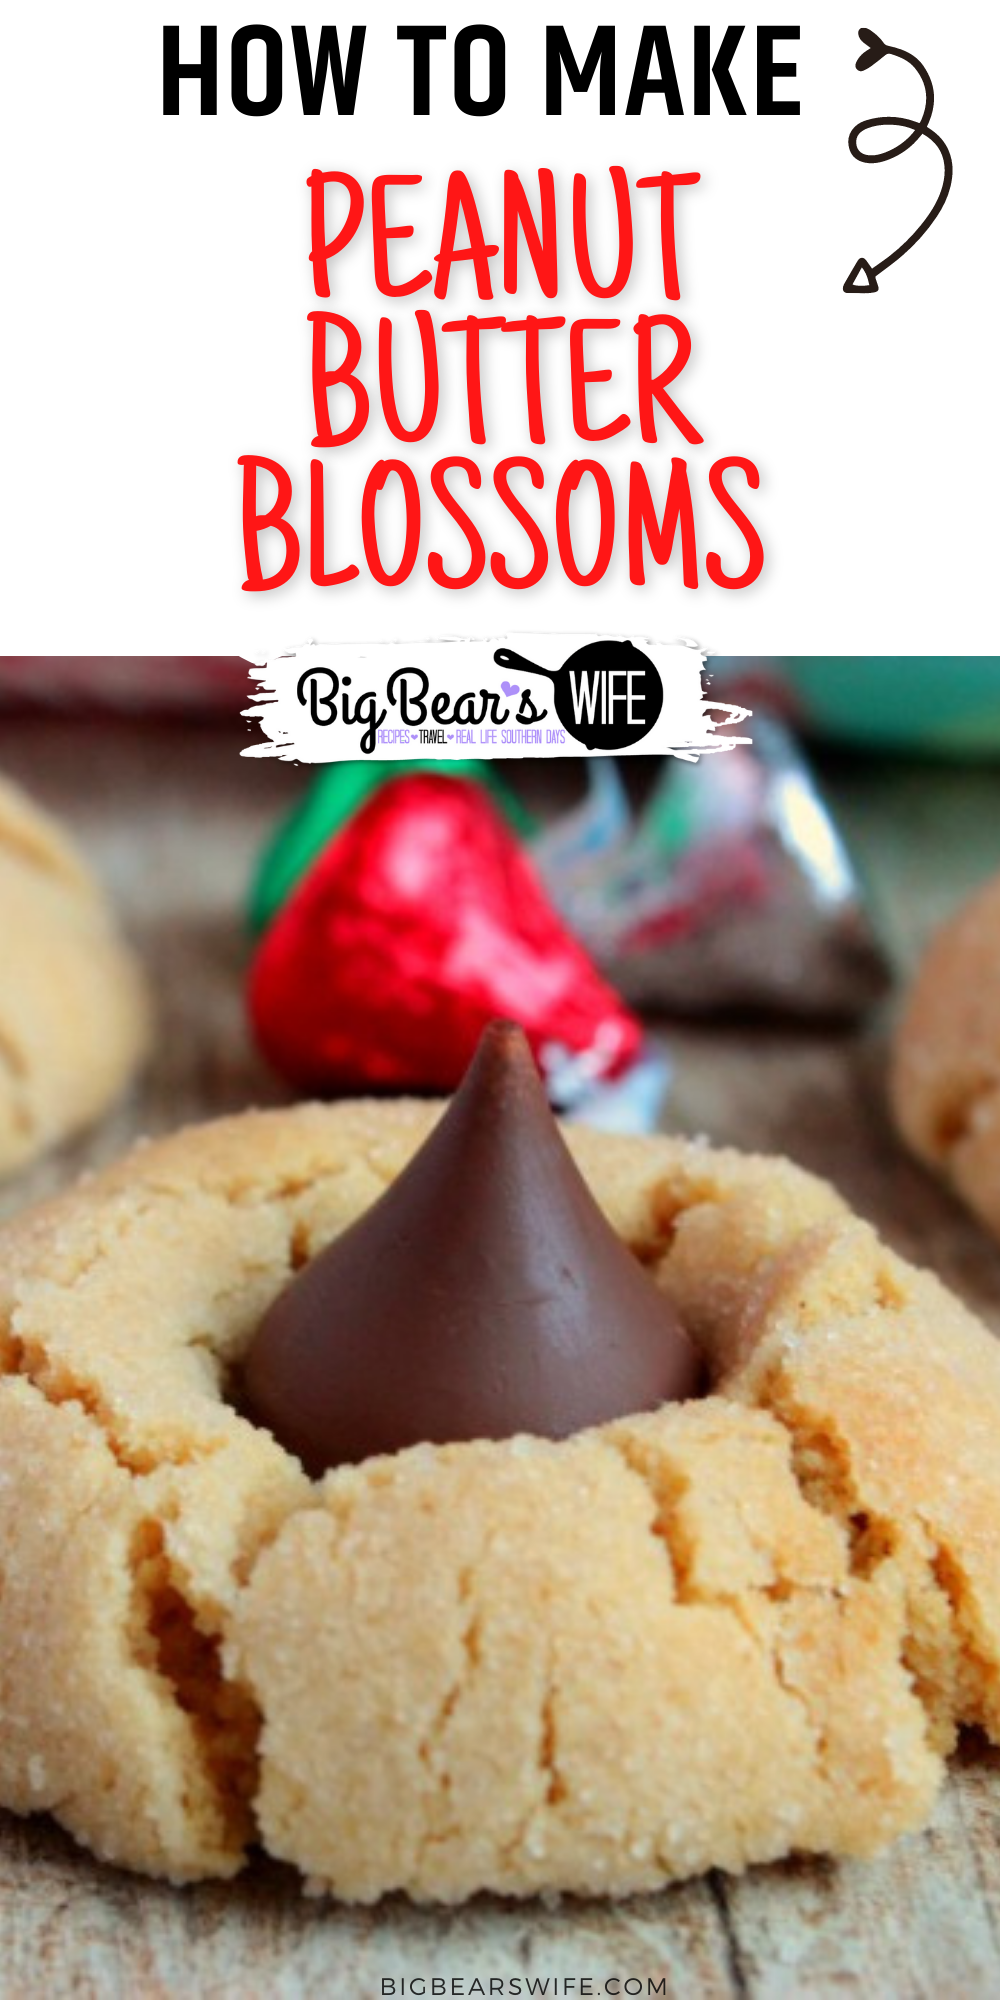 Peanut Butter Blossoms - Chocolate Kiss Peanut Butter Cookies- Sweet Peanut Butter cookies rolled in sugar and then baked to perfection! As soon as they come out of the oven, press a chocolate kiss down into the center to make the best Peanut Butter Blossoms! via @bigbearswife